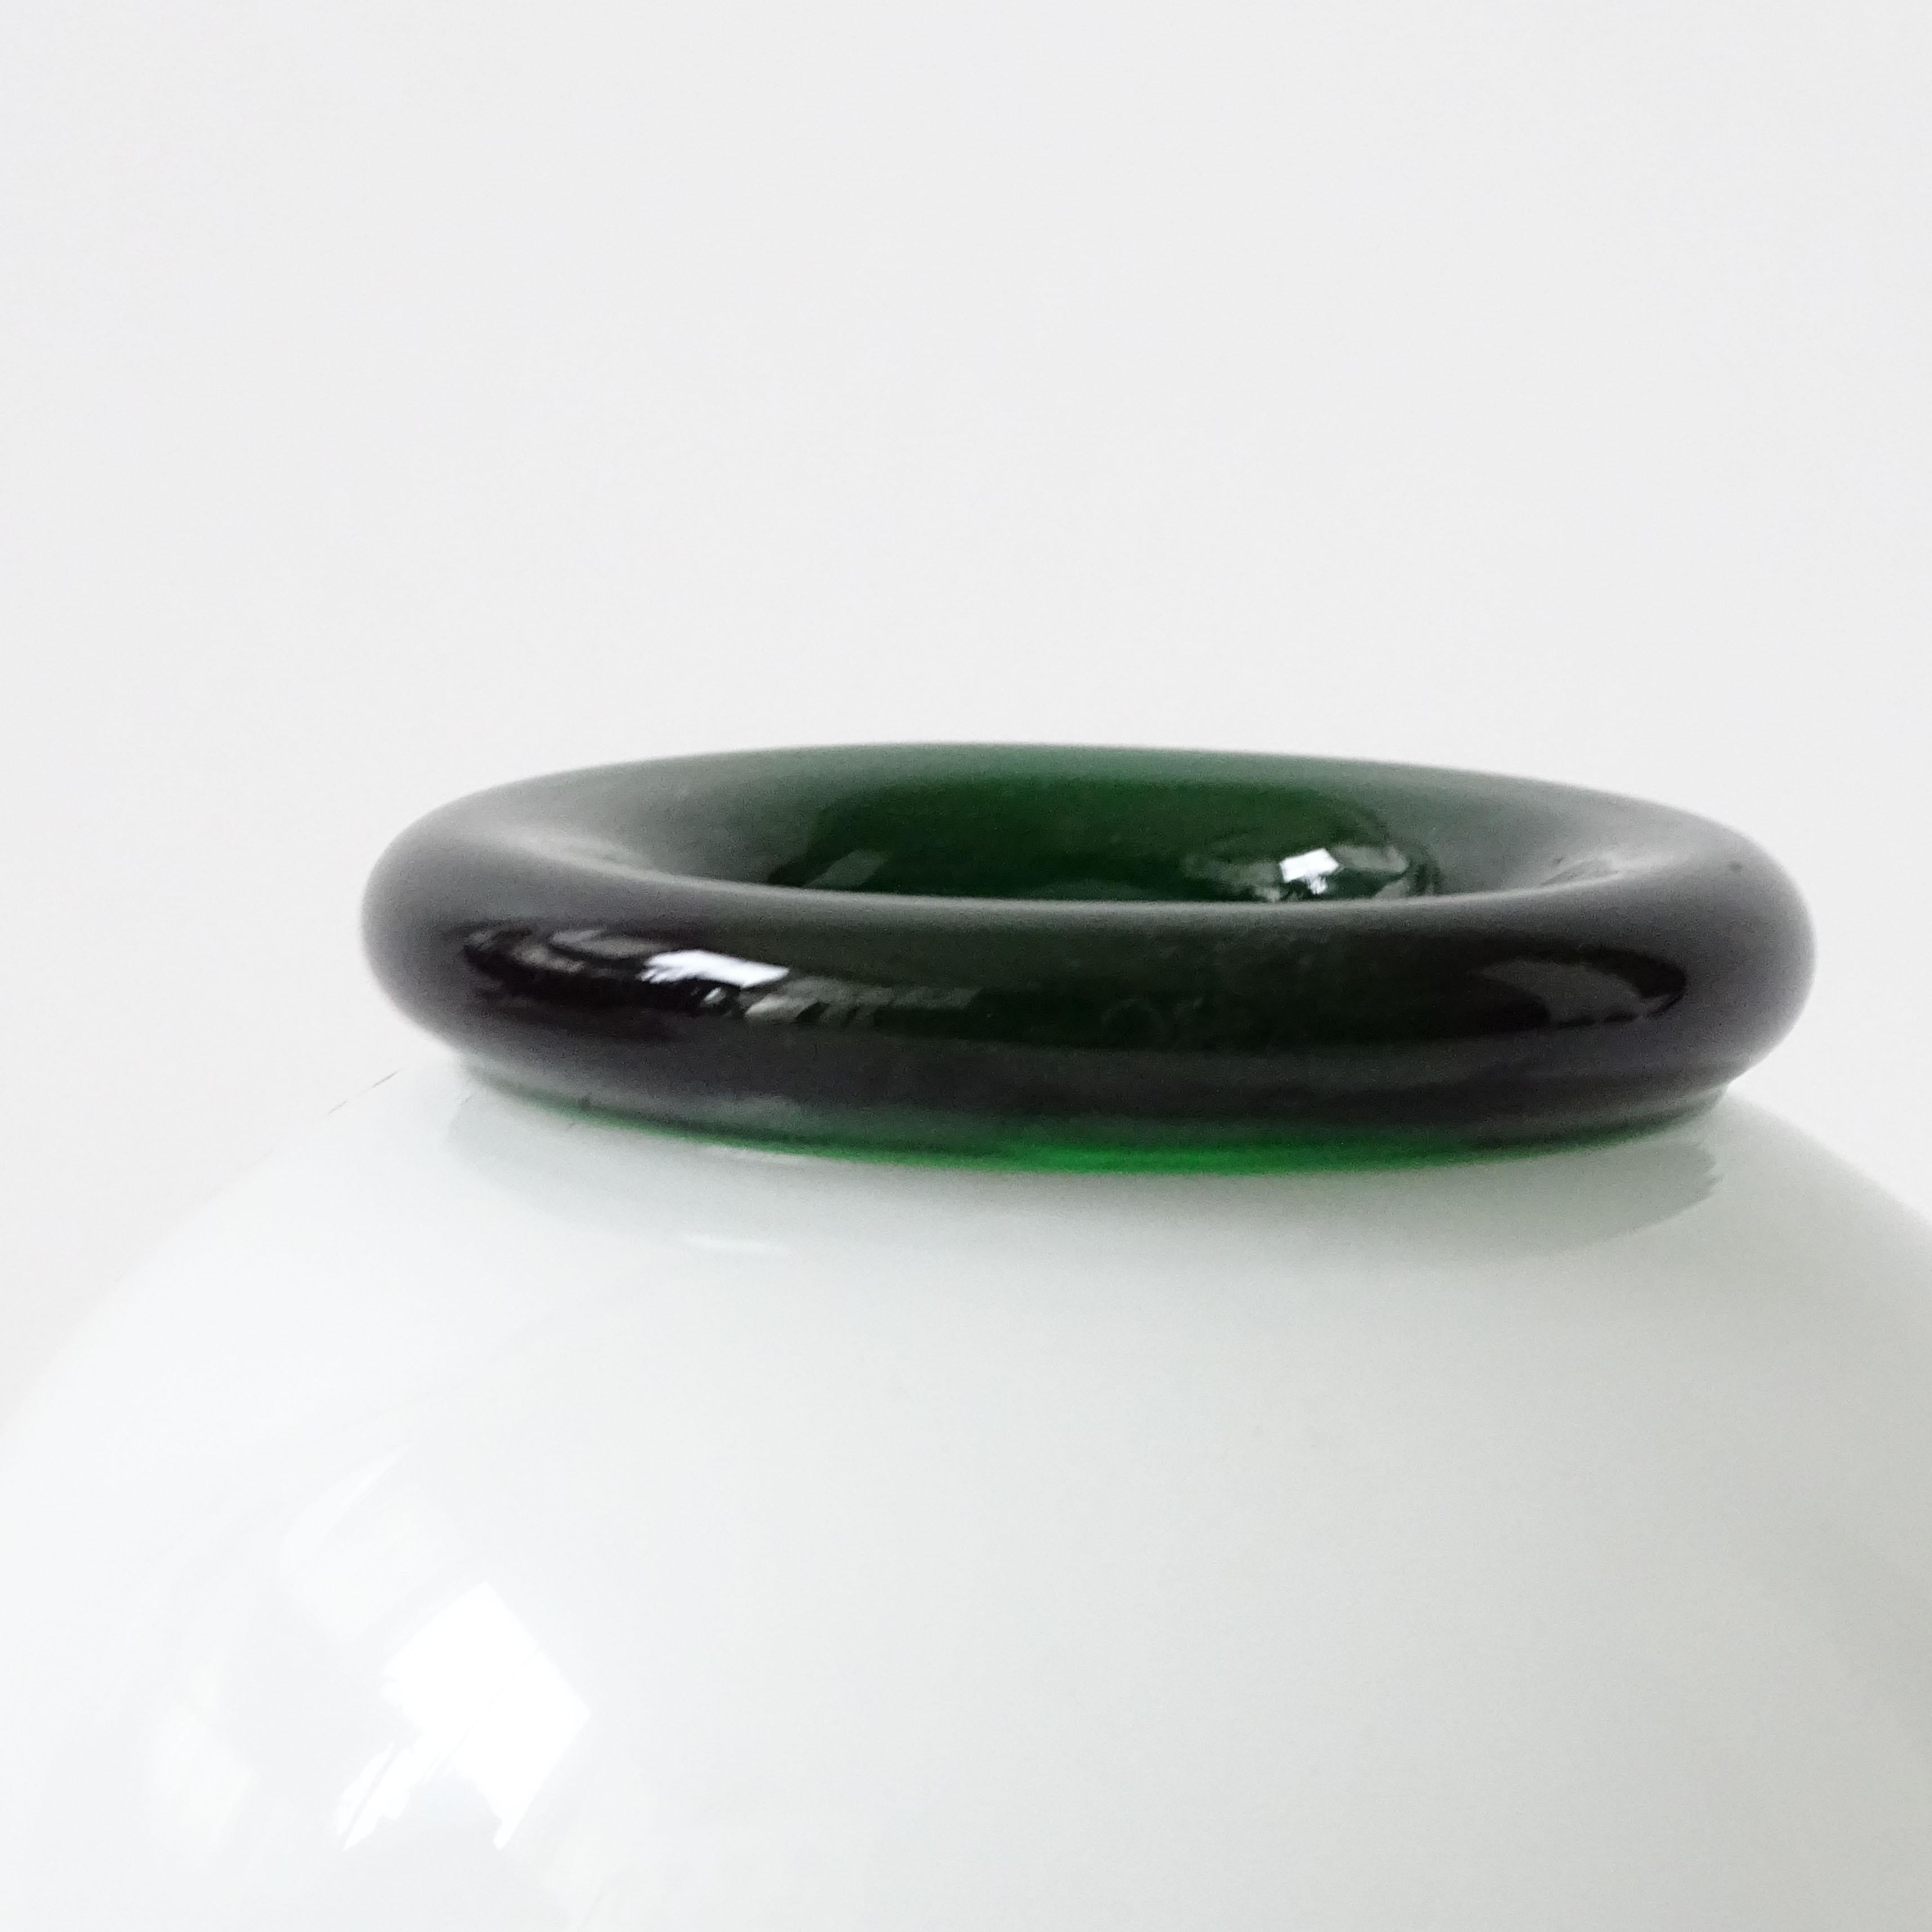 Soliflore Murano Glass Vase attributed to Ettore Sottsass for Vistosi In Good Condition For Sale In Milan, IT